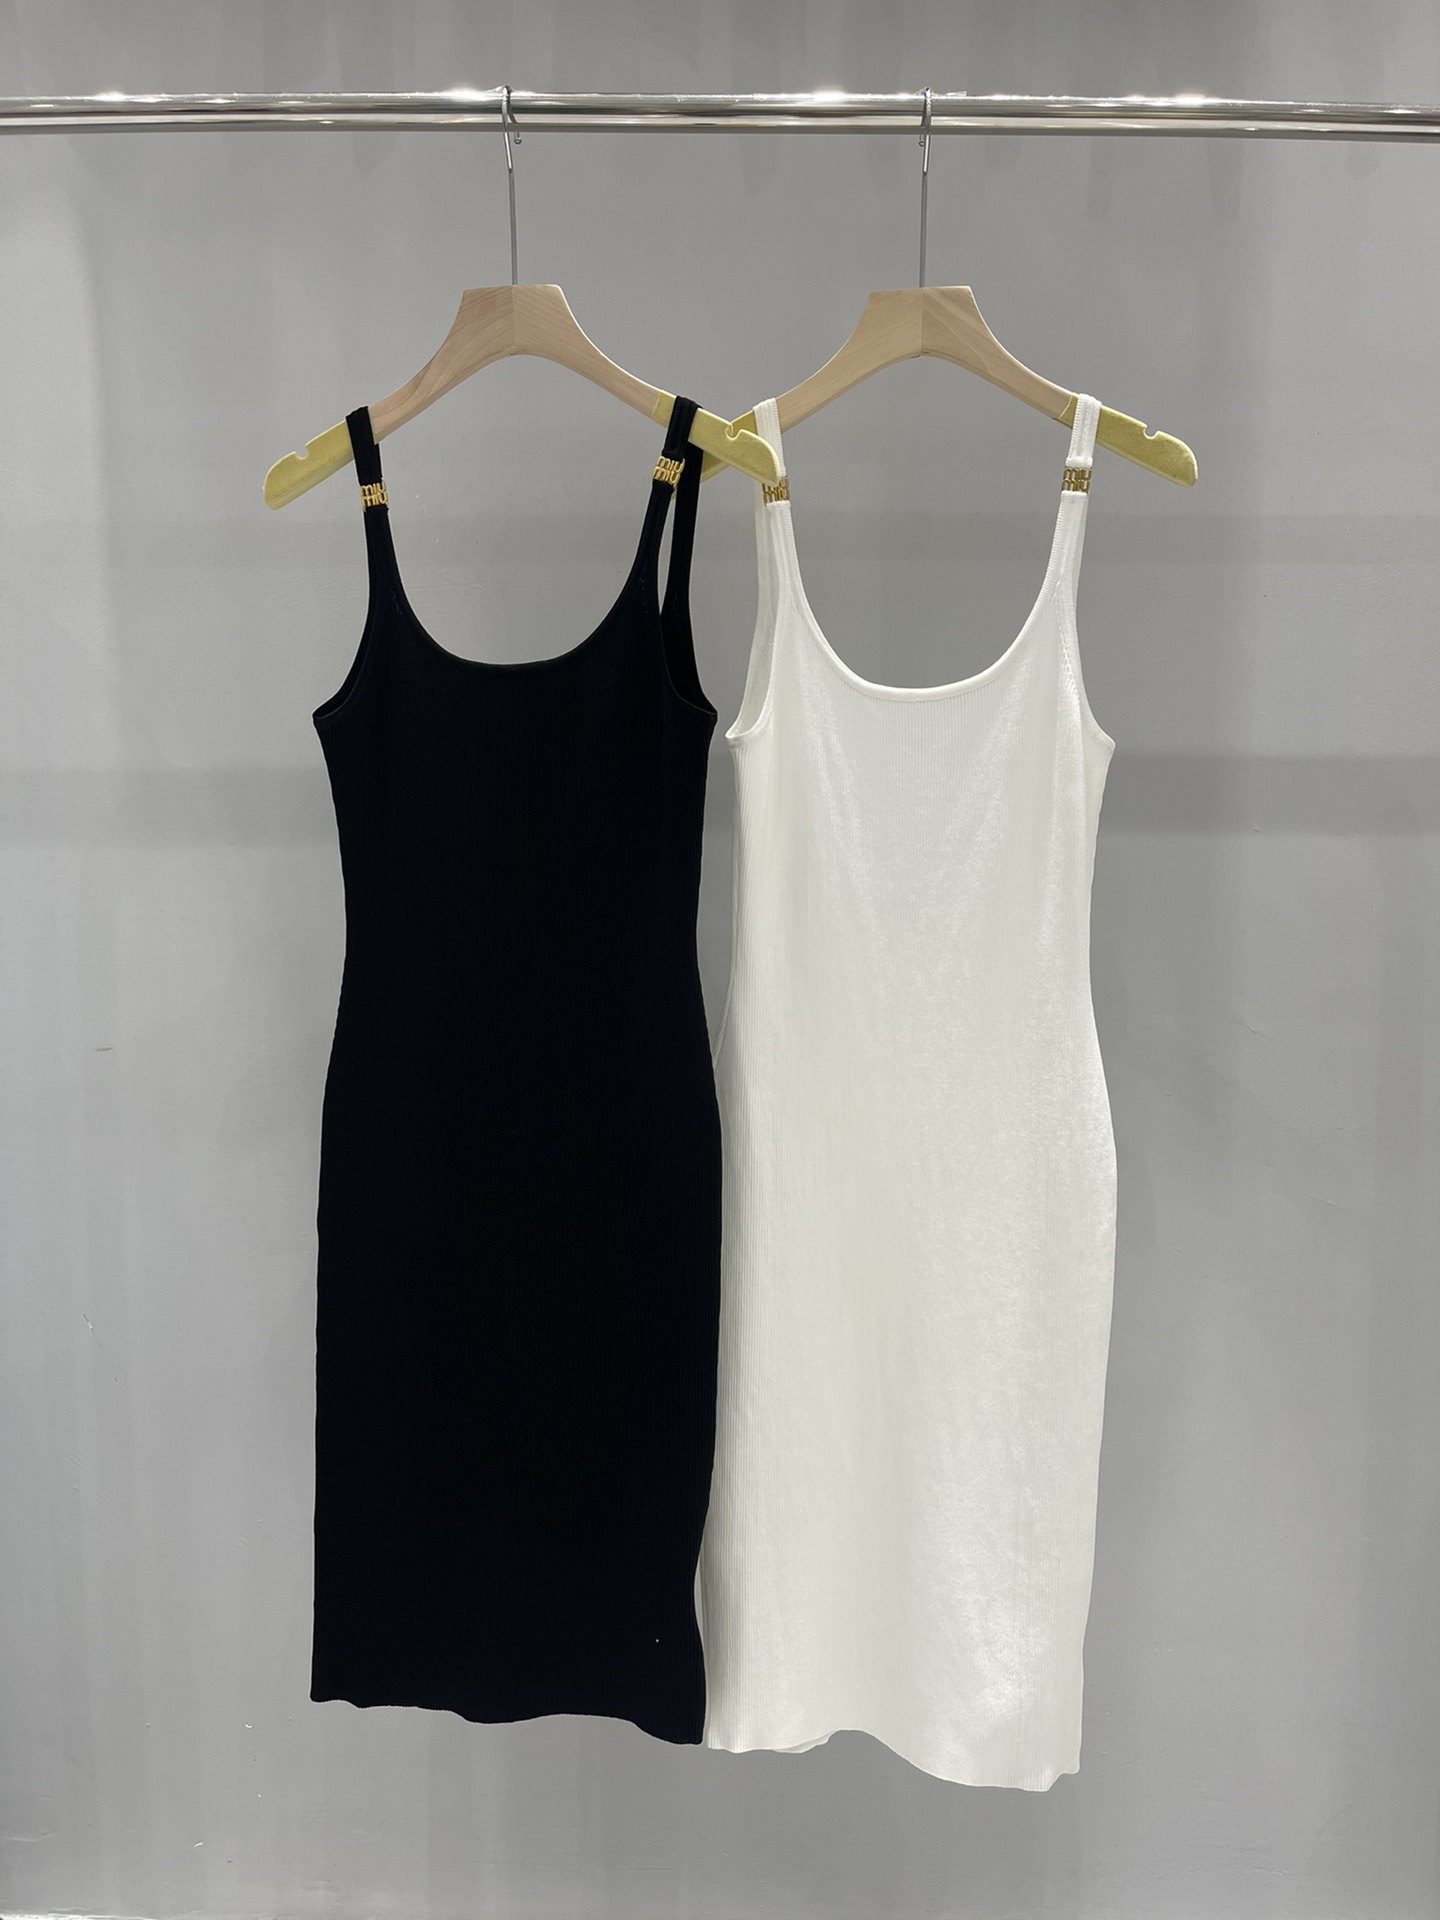 MiuMiu Clothing Dresses Black White Knitting Spring/Summer Collection